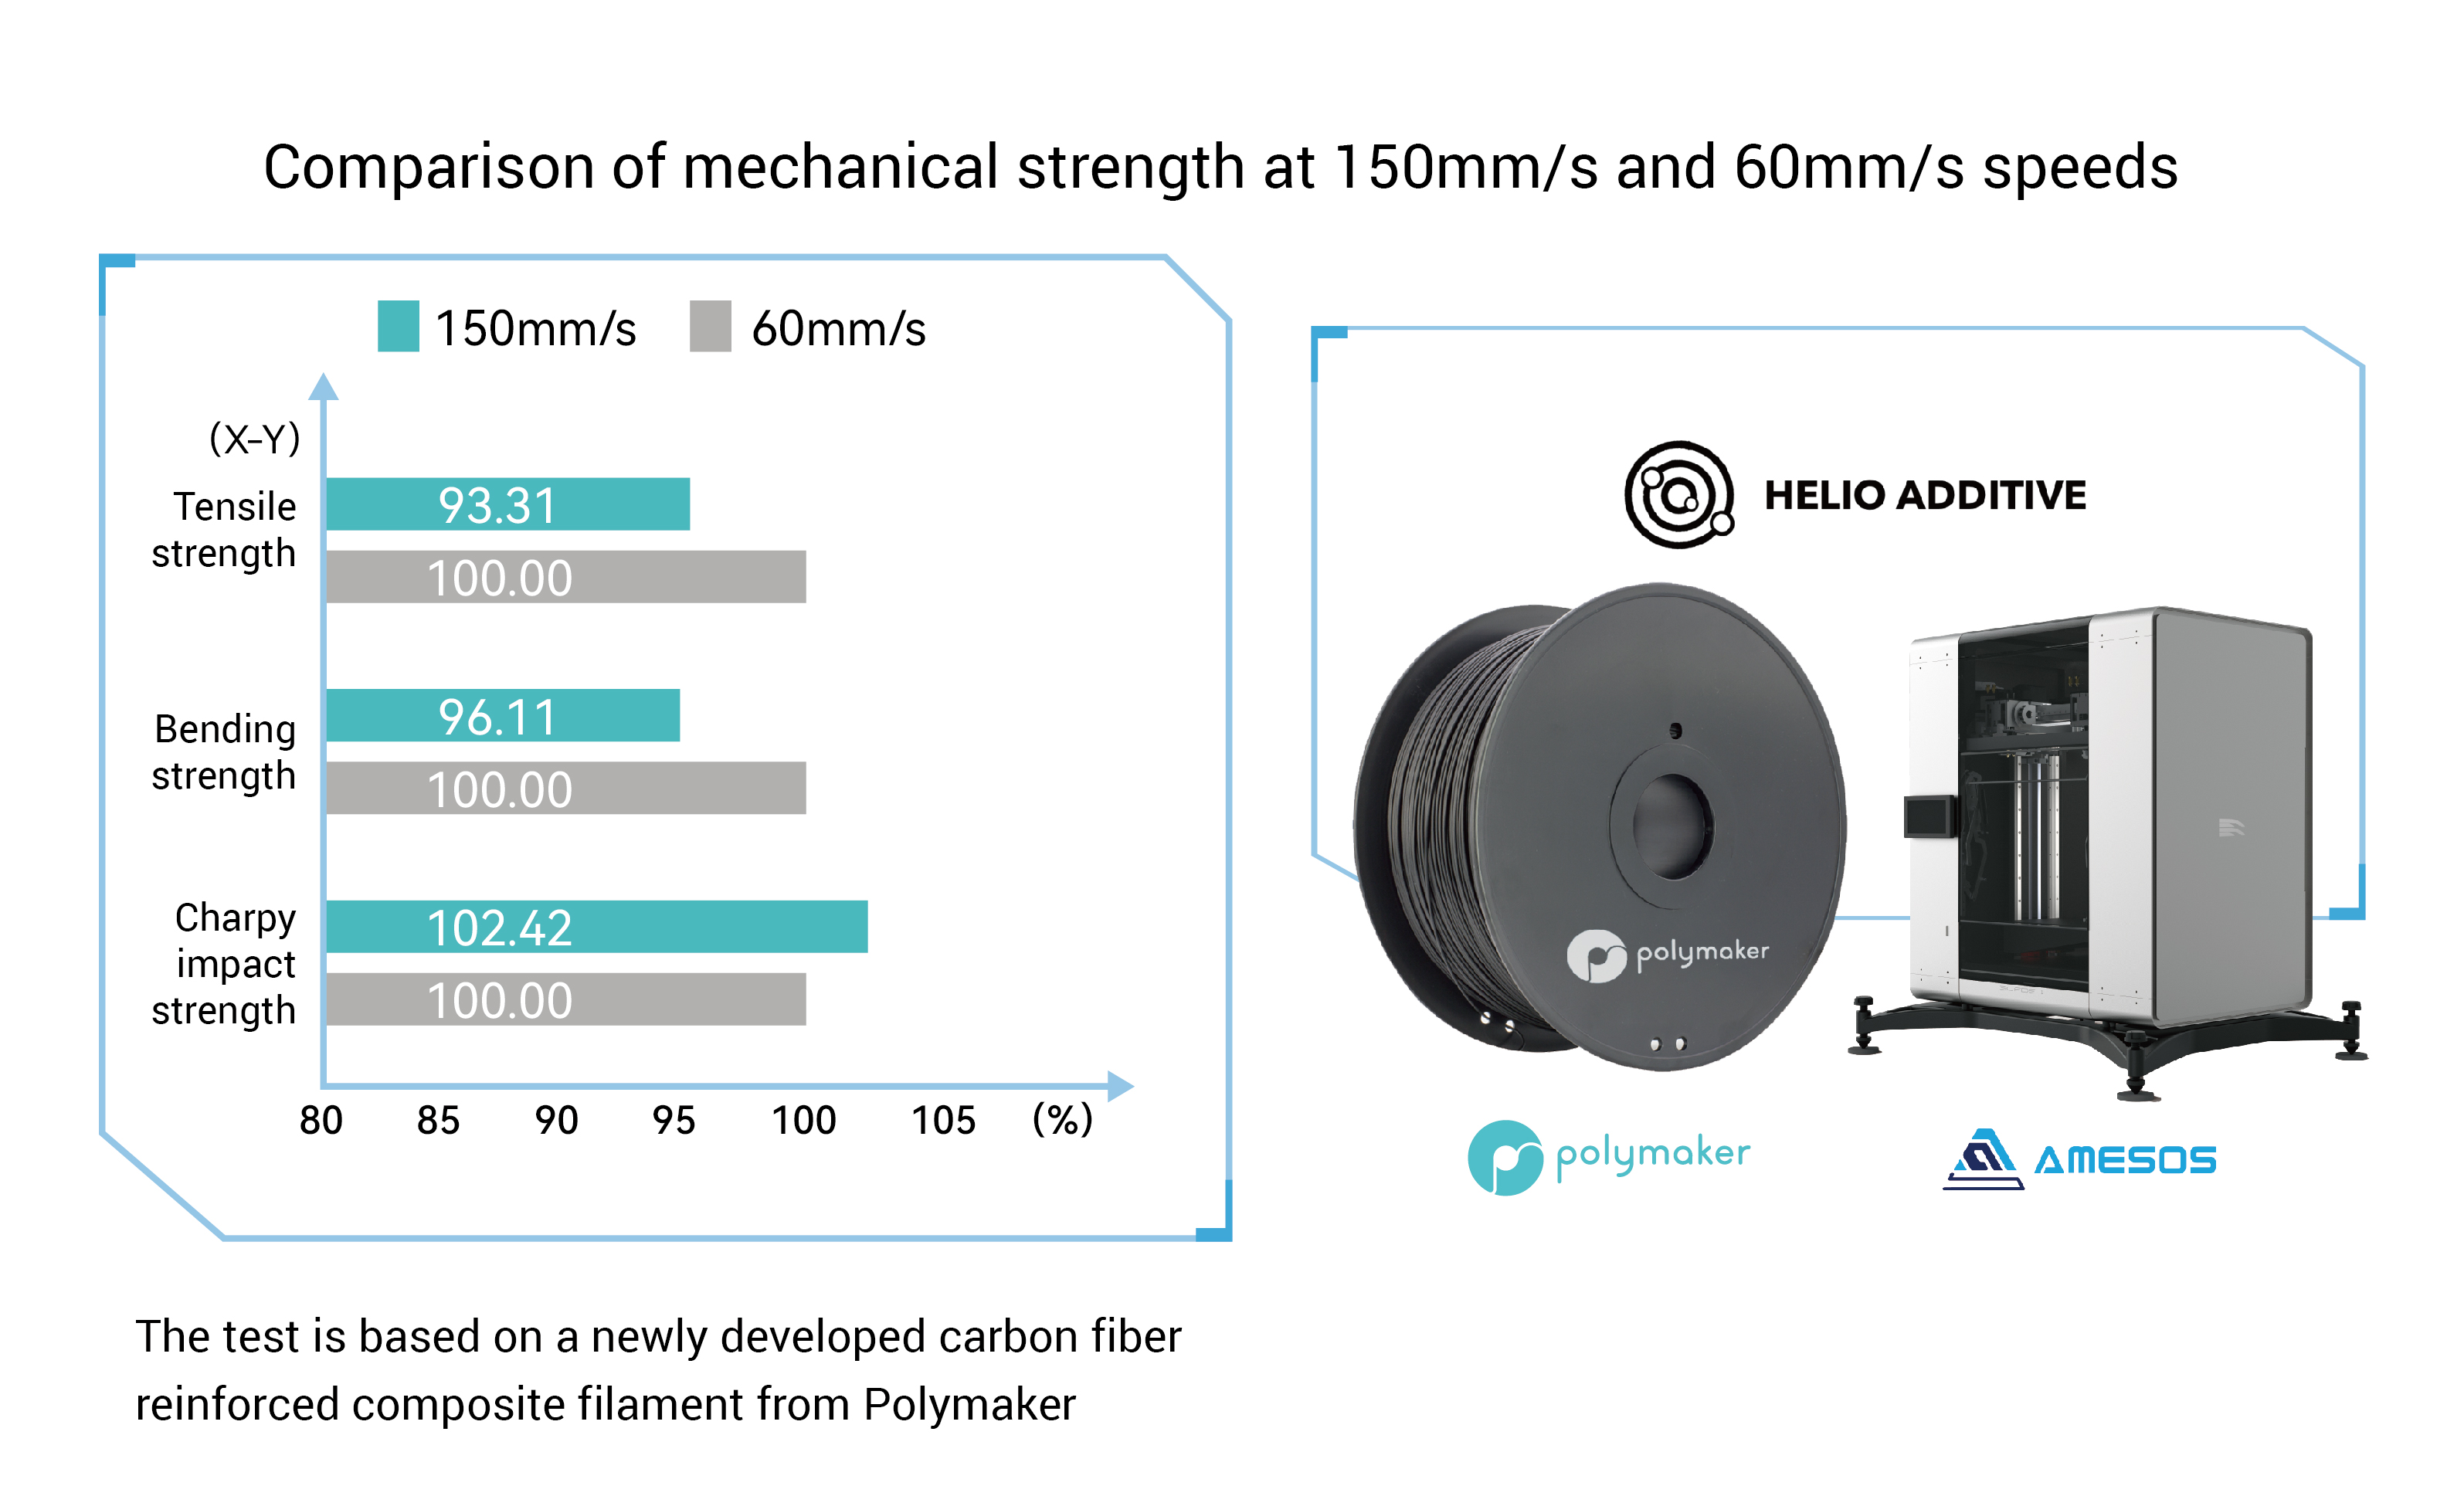 Comparison of mechanical strength at 150mms and 60mms speeds